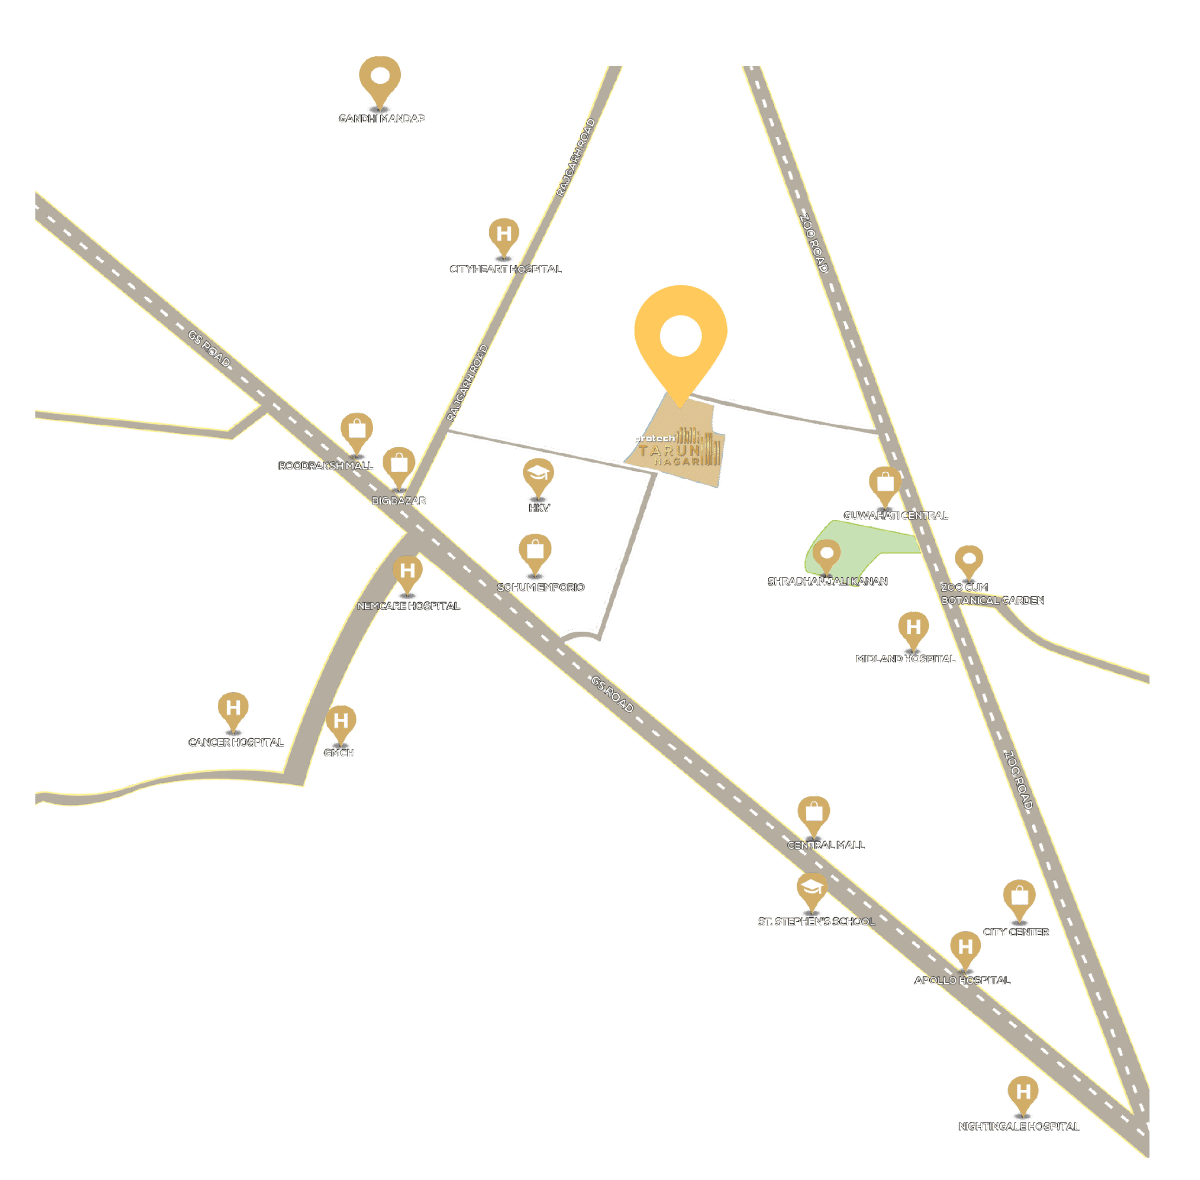 Location map of our Ultra-luxurious Apartment in Guwahati - Protech Tarun Nagar. It is located at the center of Guwahati, and all the major locations are near by